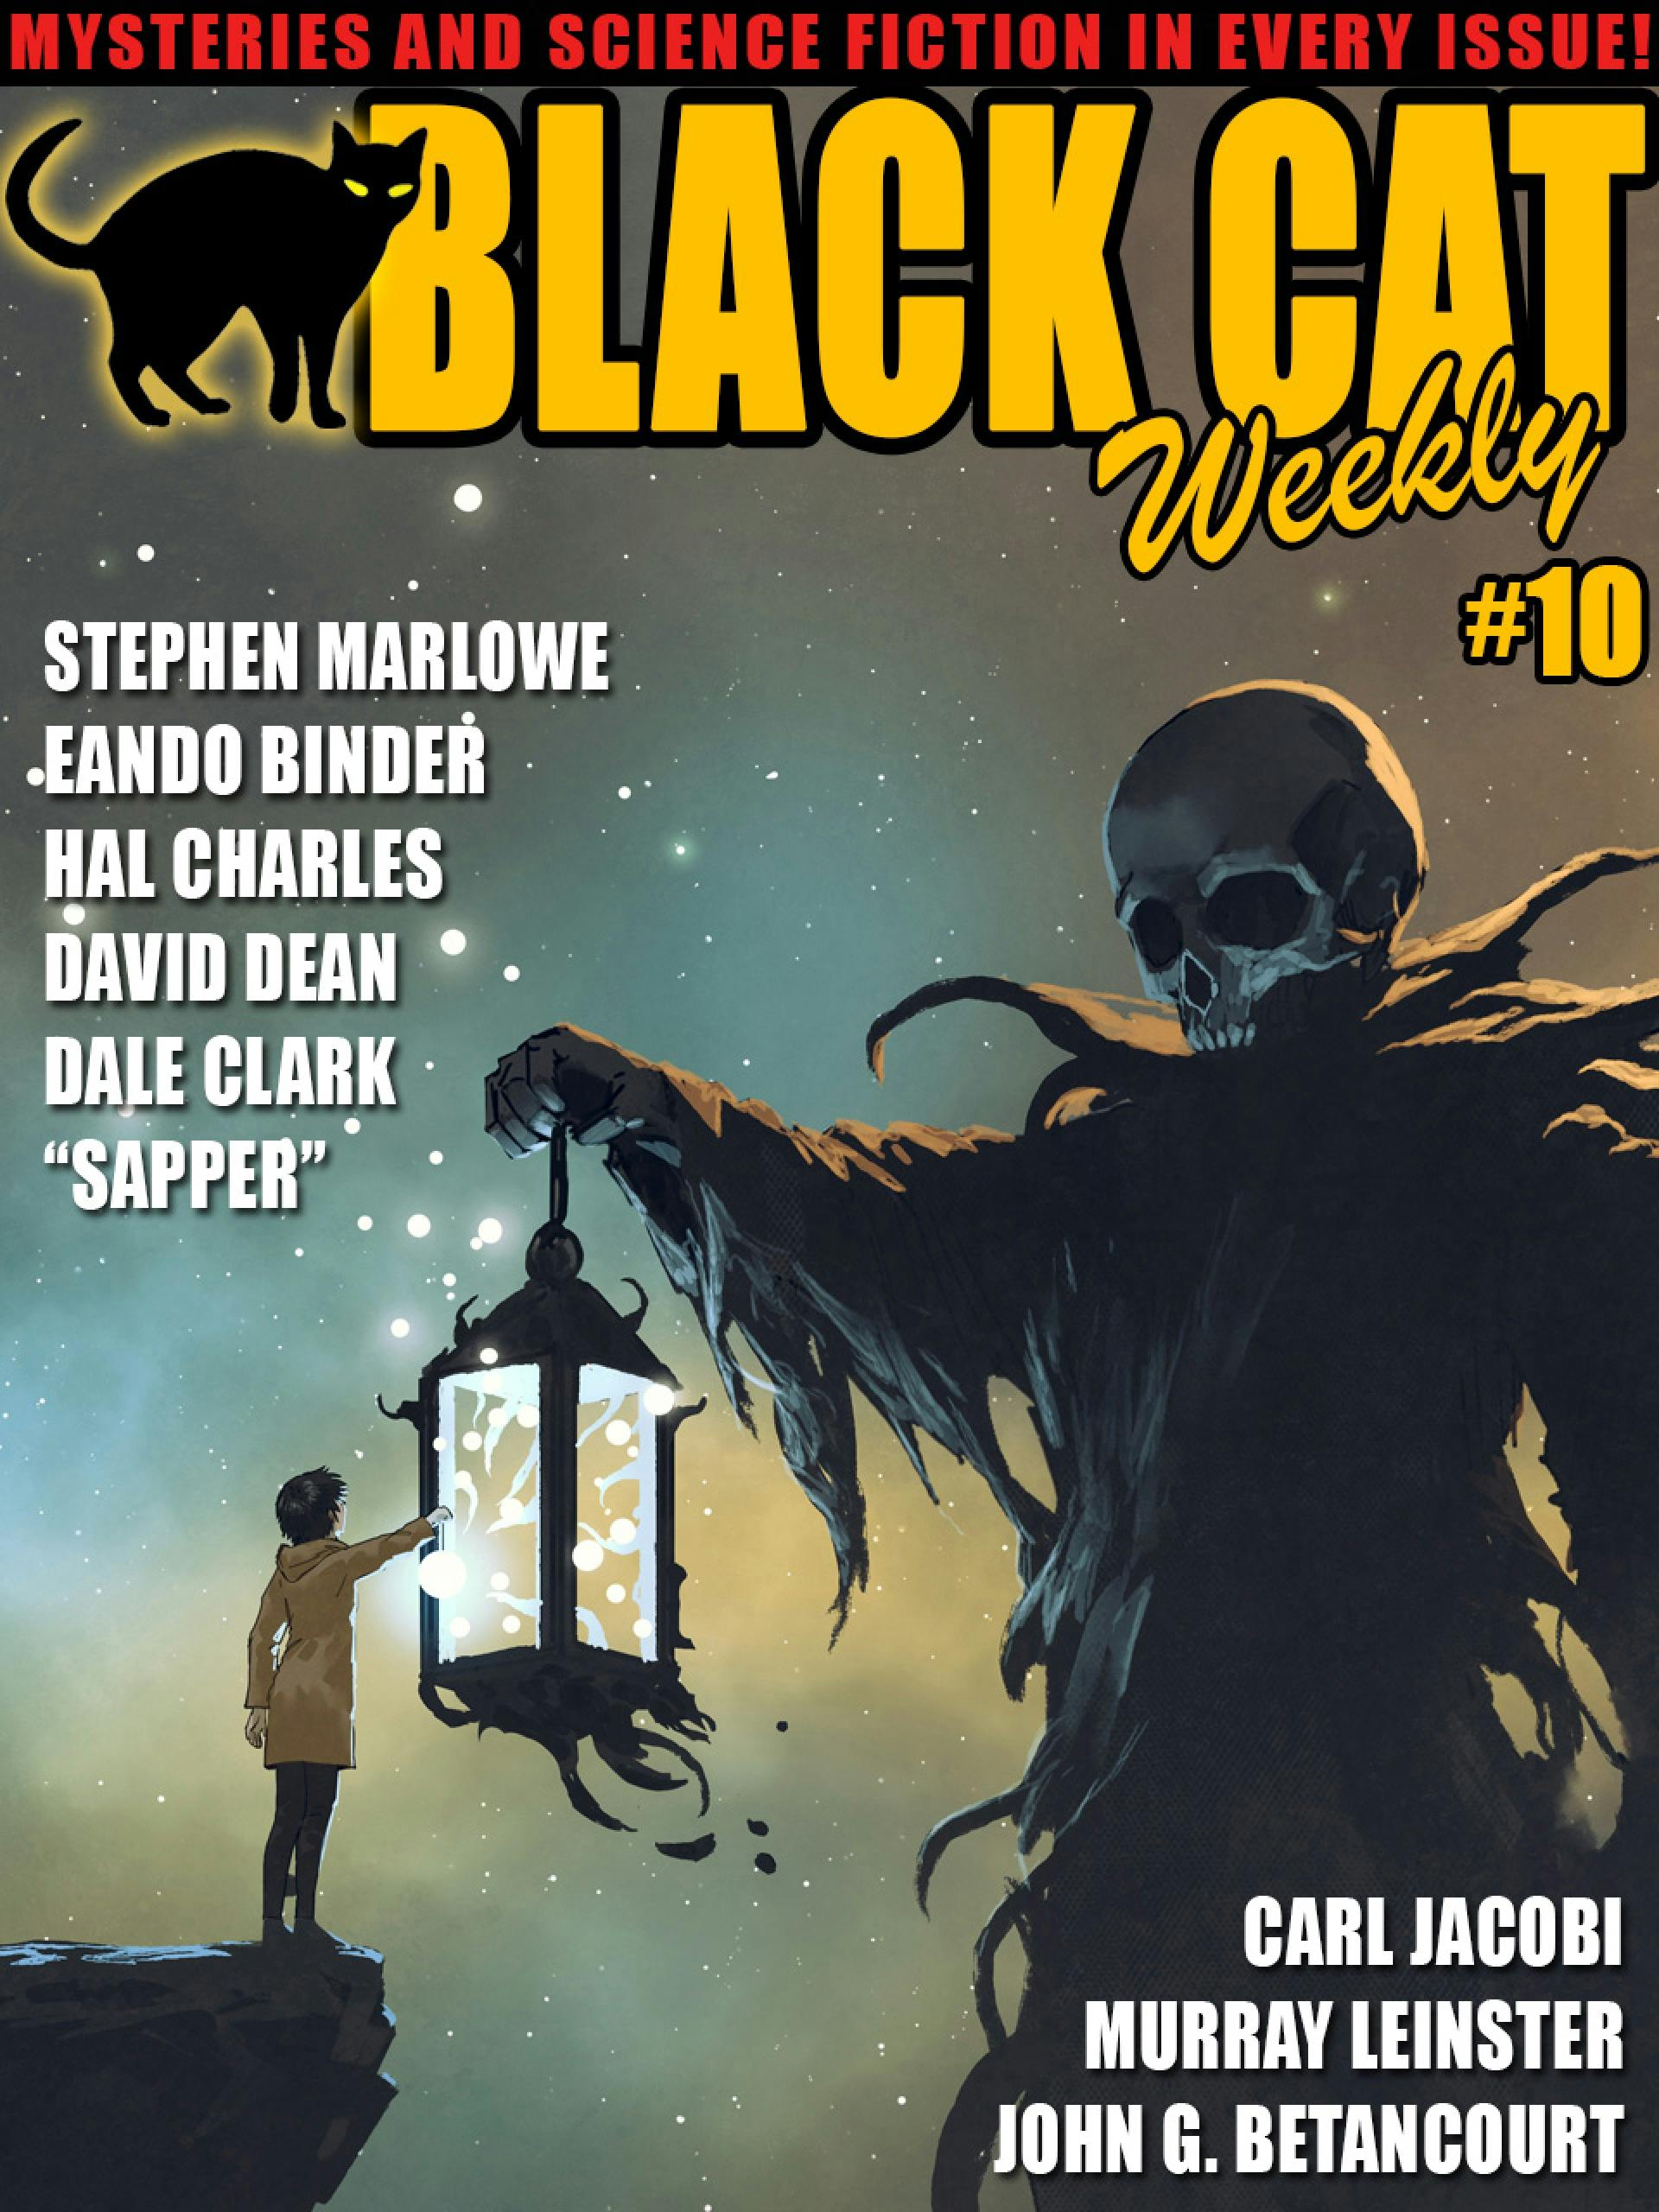 Black Cat Weekly #10 - undefined